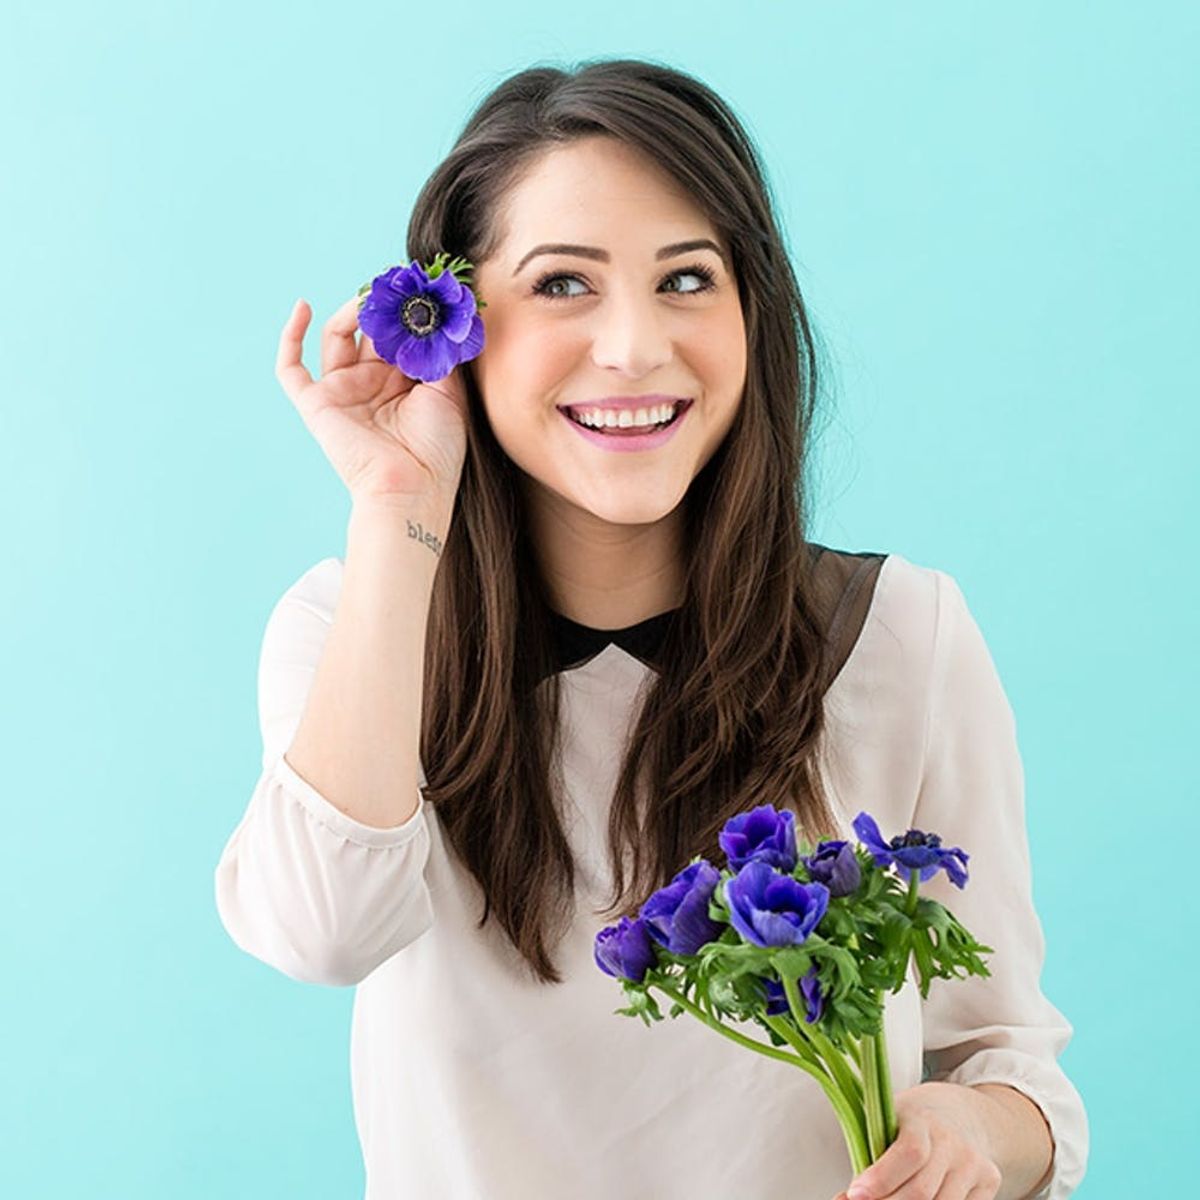 5 Ways to Get Fresh for Spring Without Any Makeup